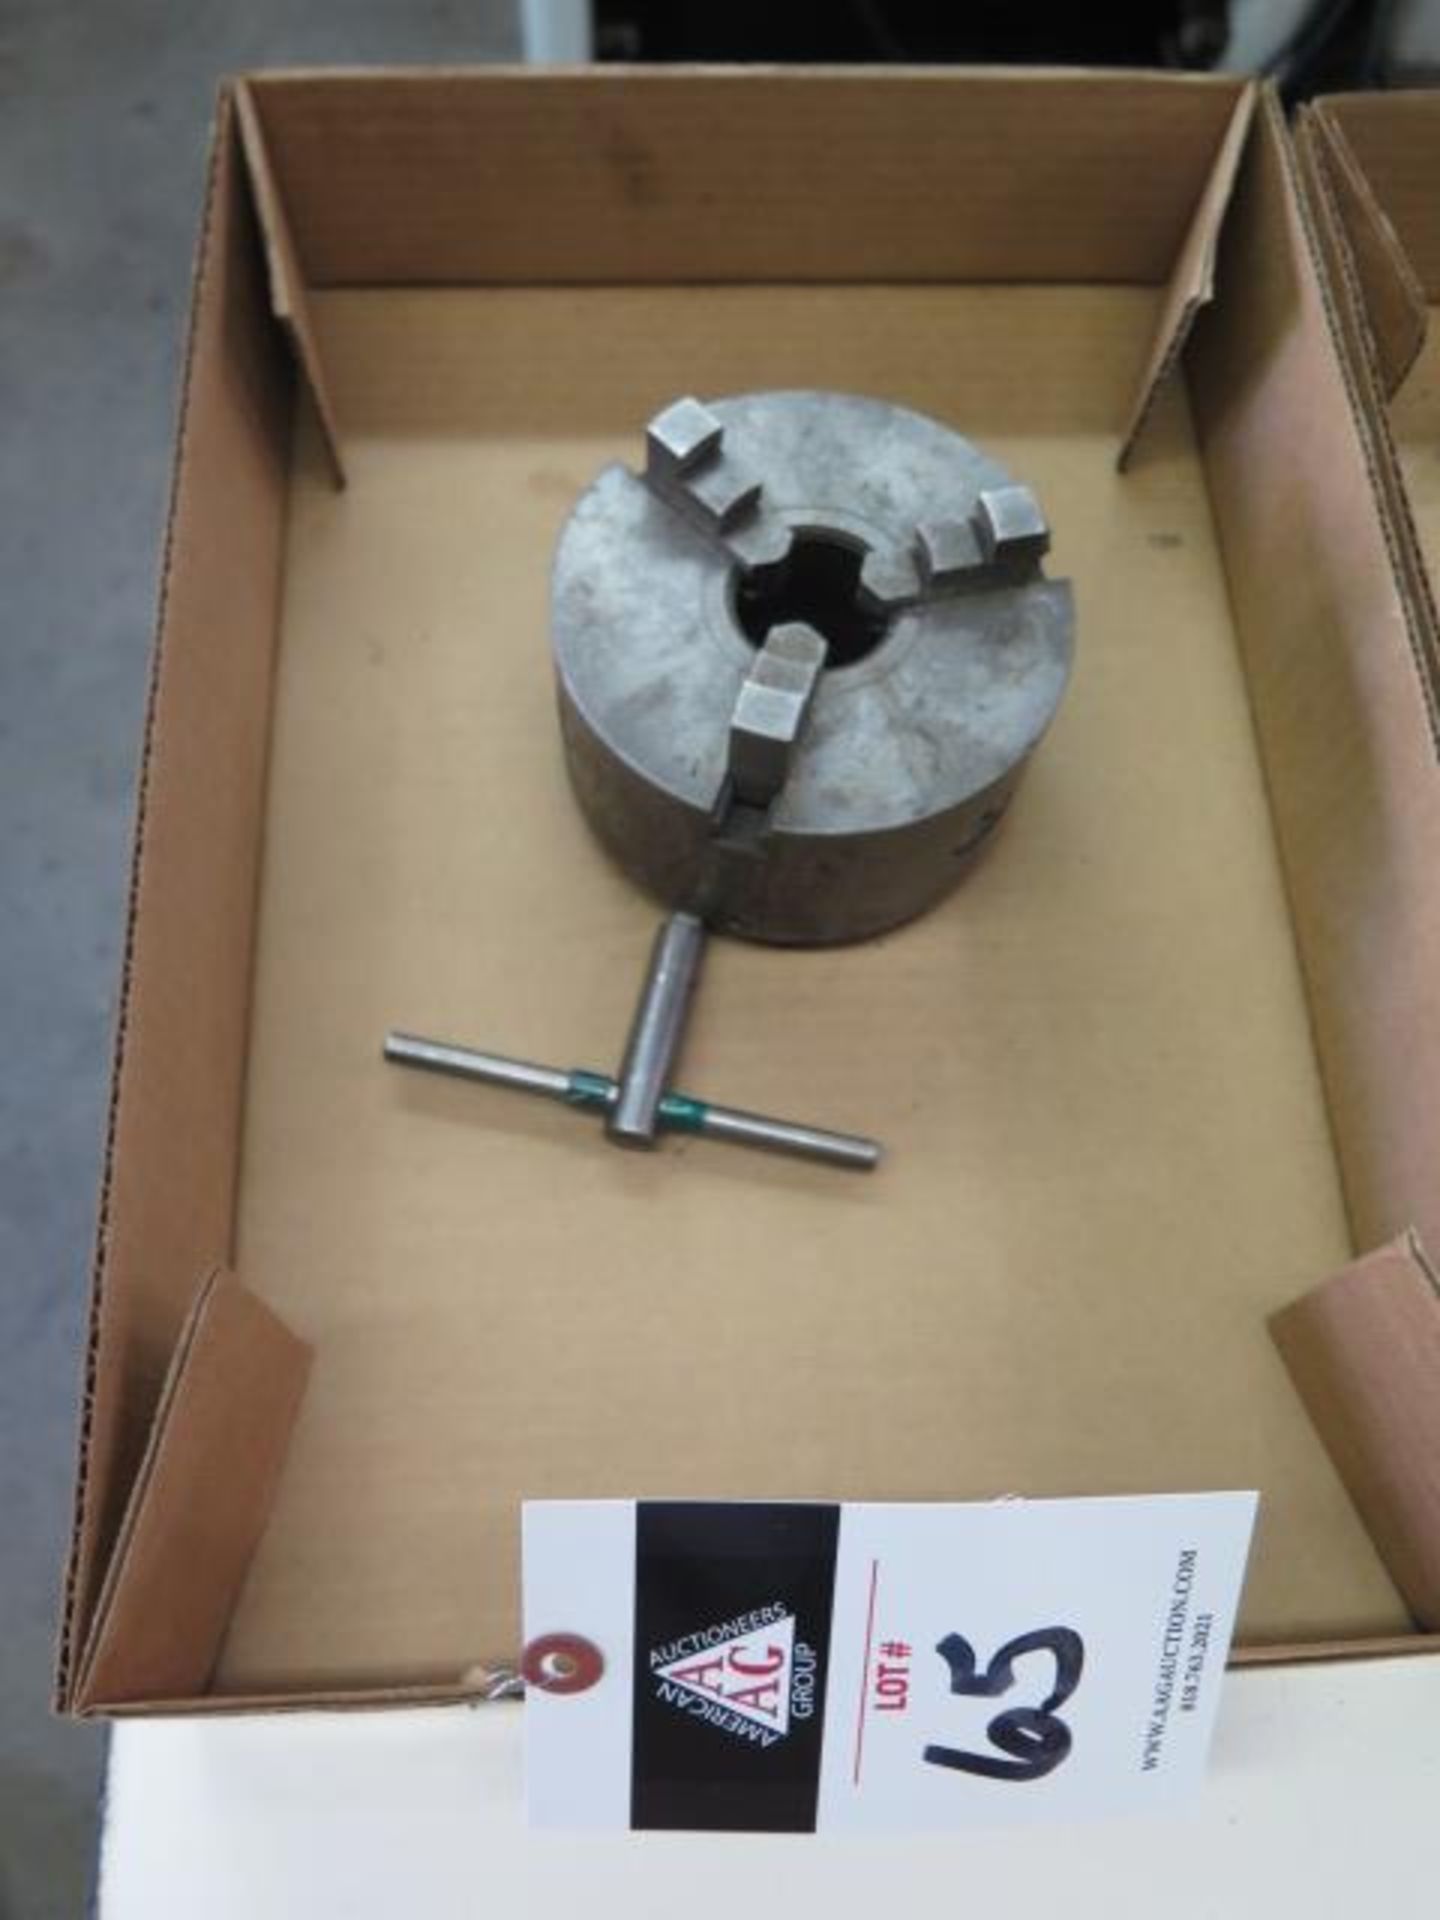 5" 3-Jaw Chuck (SOLD AS-IS - NO WARRANTY)